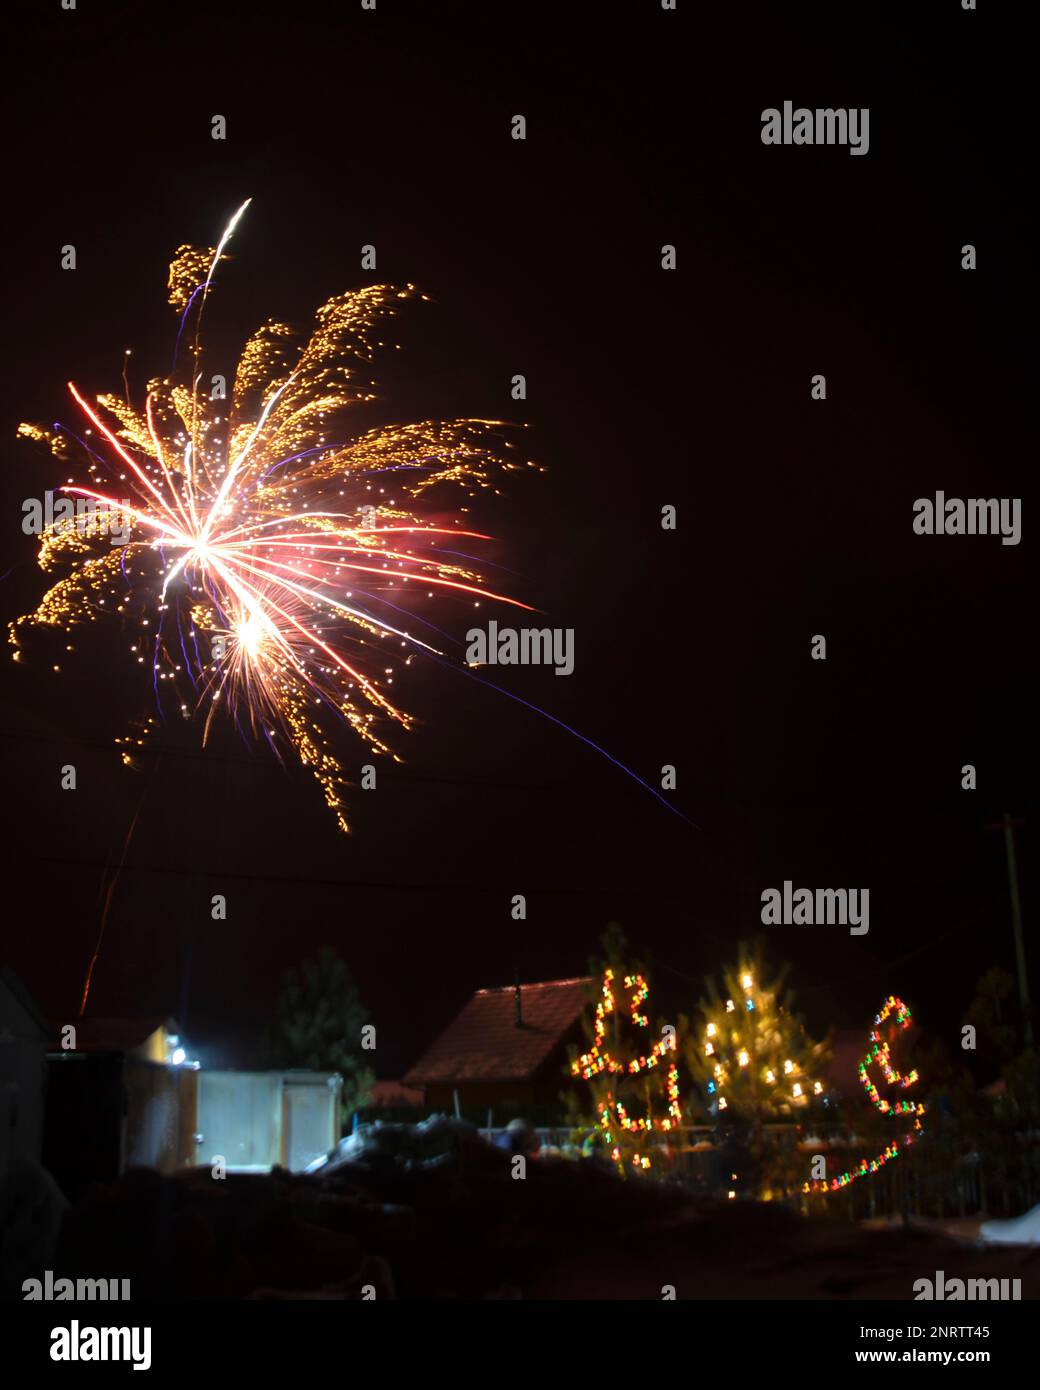 Bright flashes of fireworks in a garden plot in Siberia in winter with Christmas trees decorated with garlands on the snow at night. Stock Photo